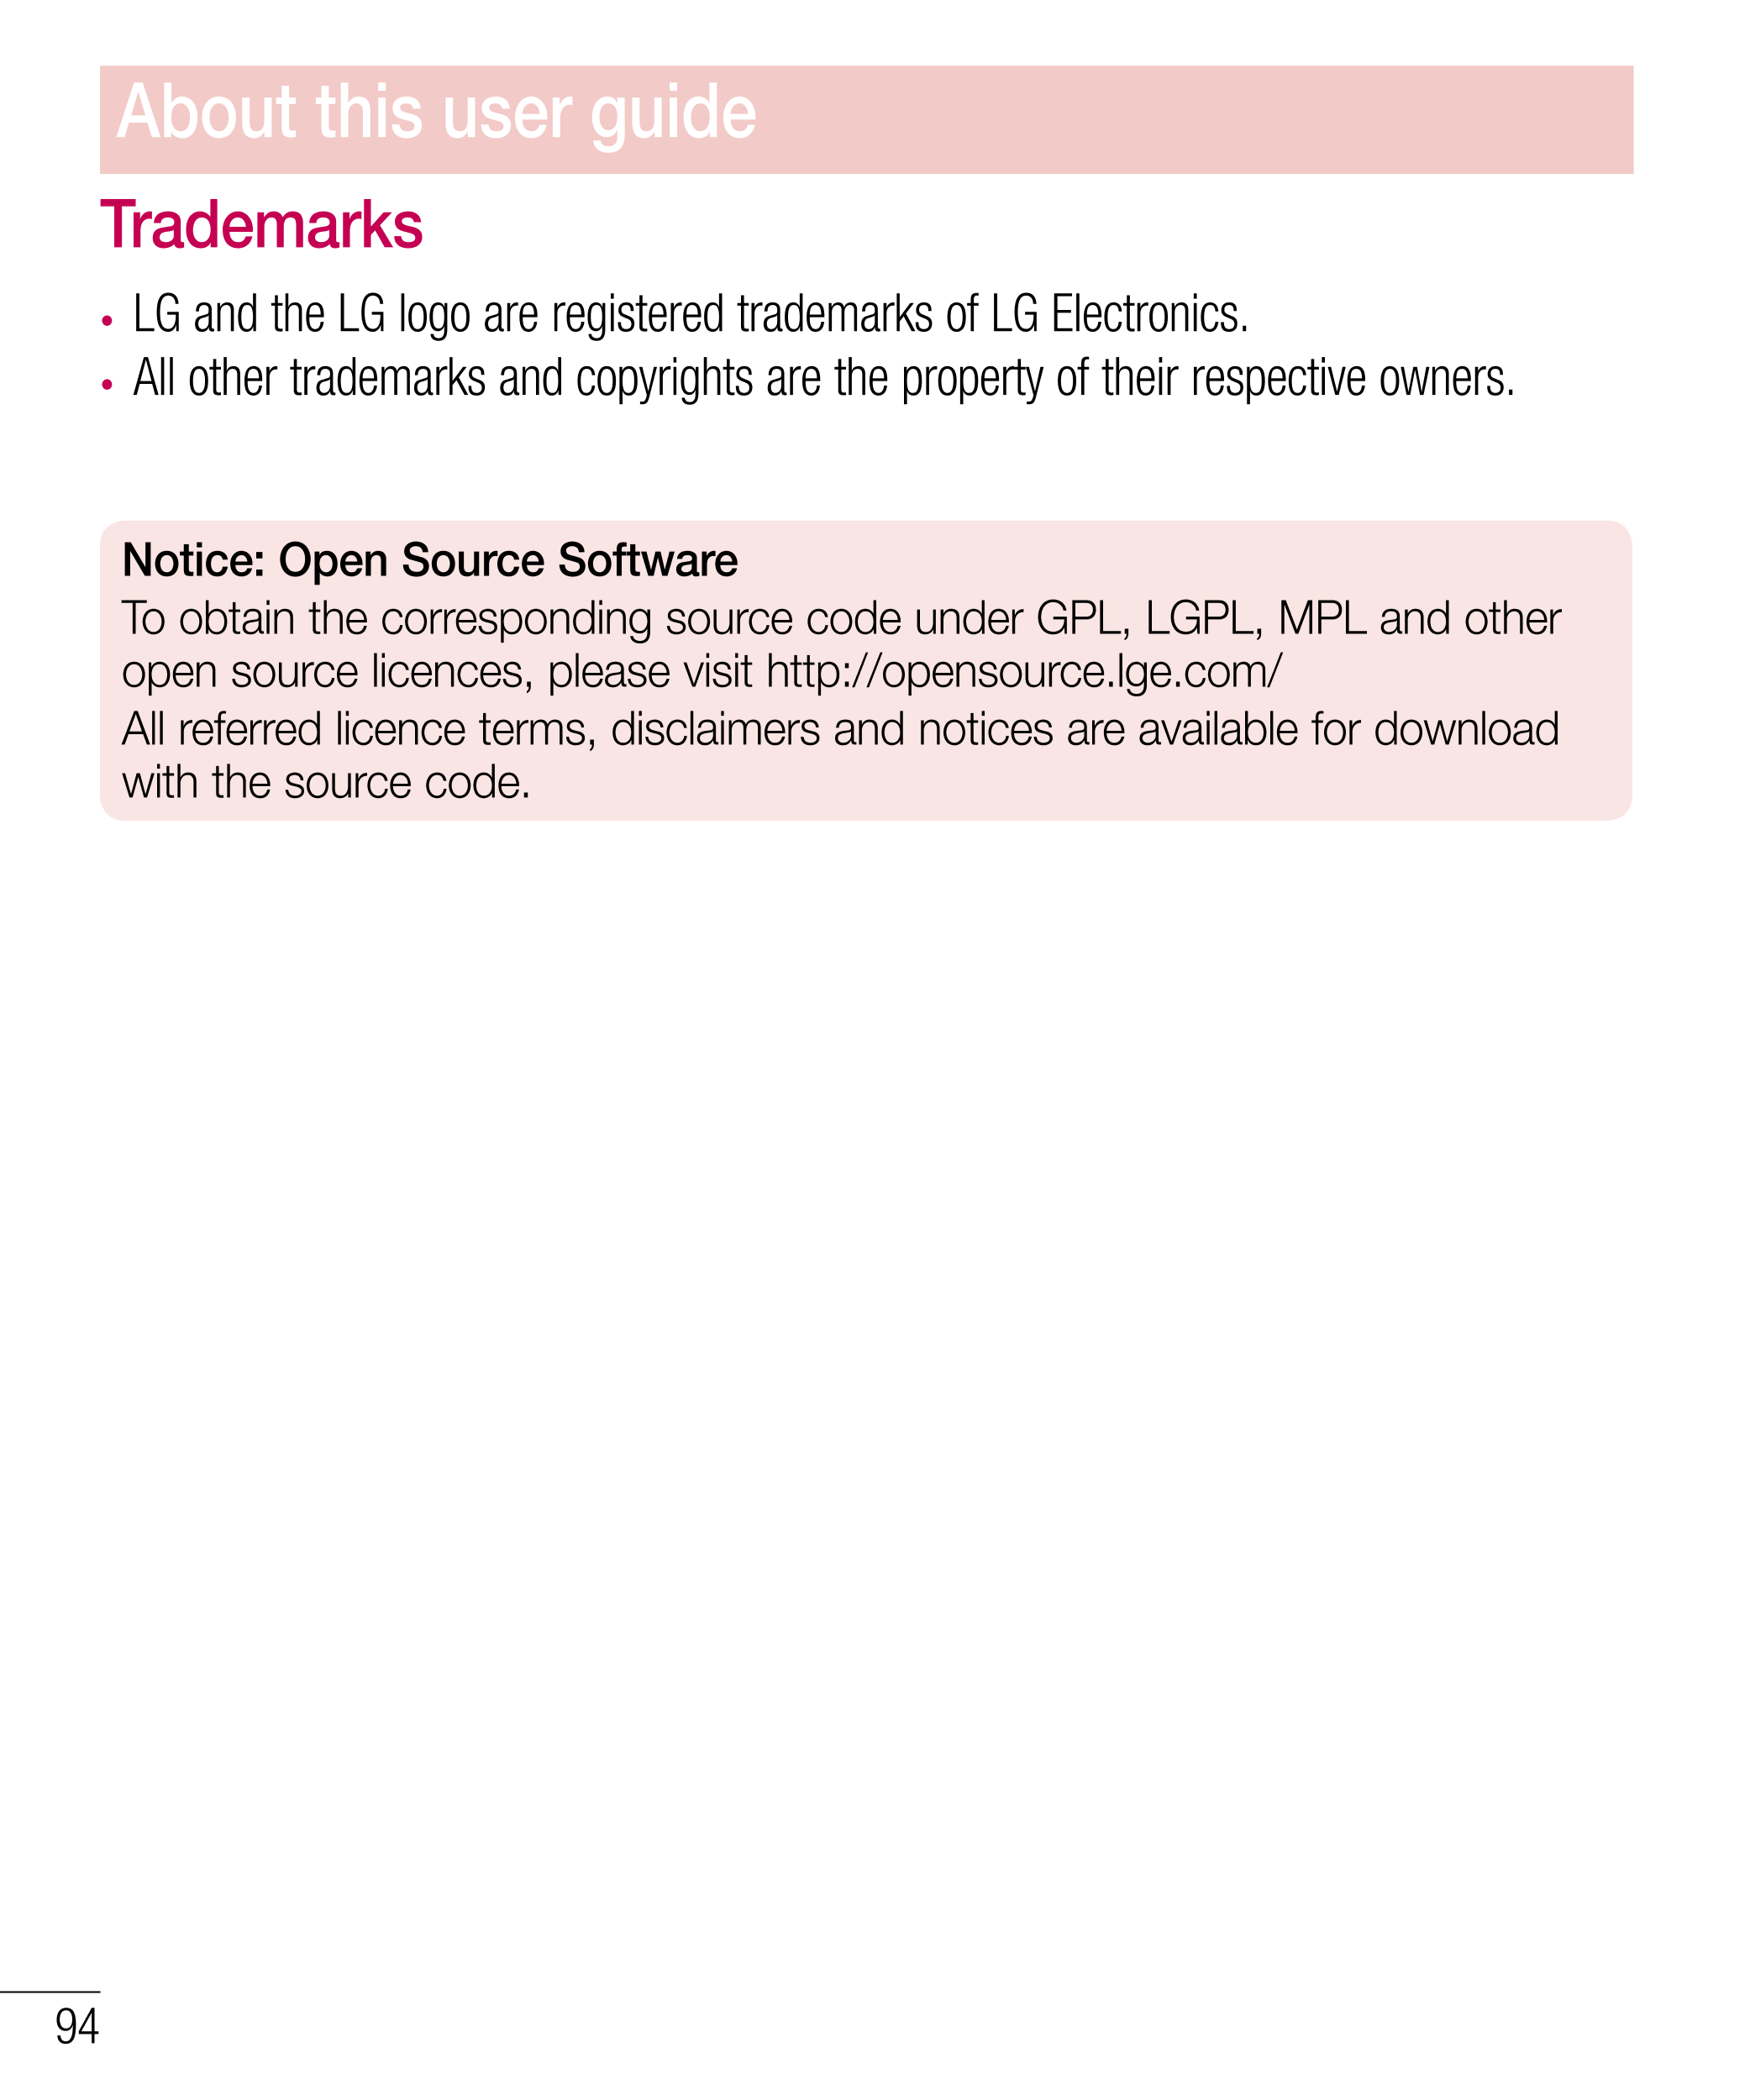 About this user guide
Trademarks
•  LG and the LG logo are registered trademarks of LG Electronics.
•  All other trademarks and 